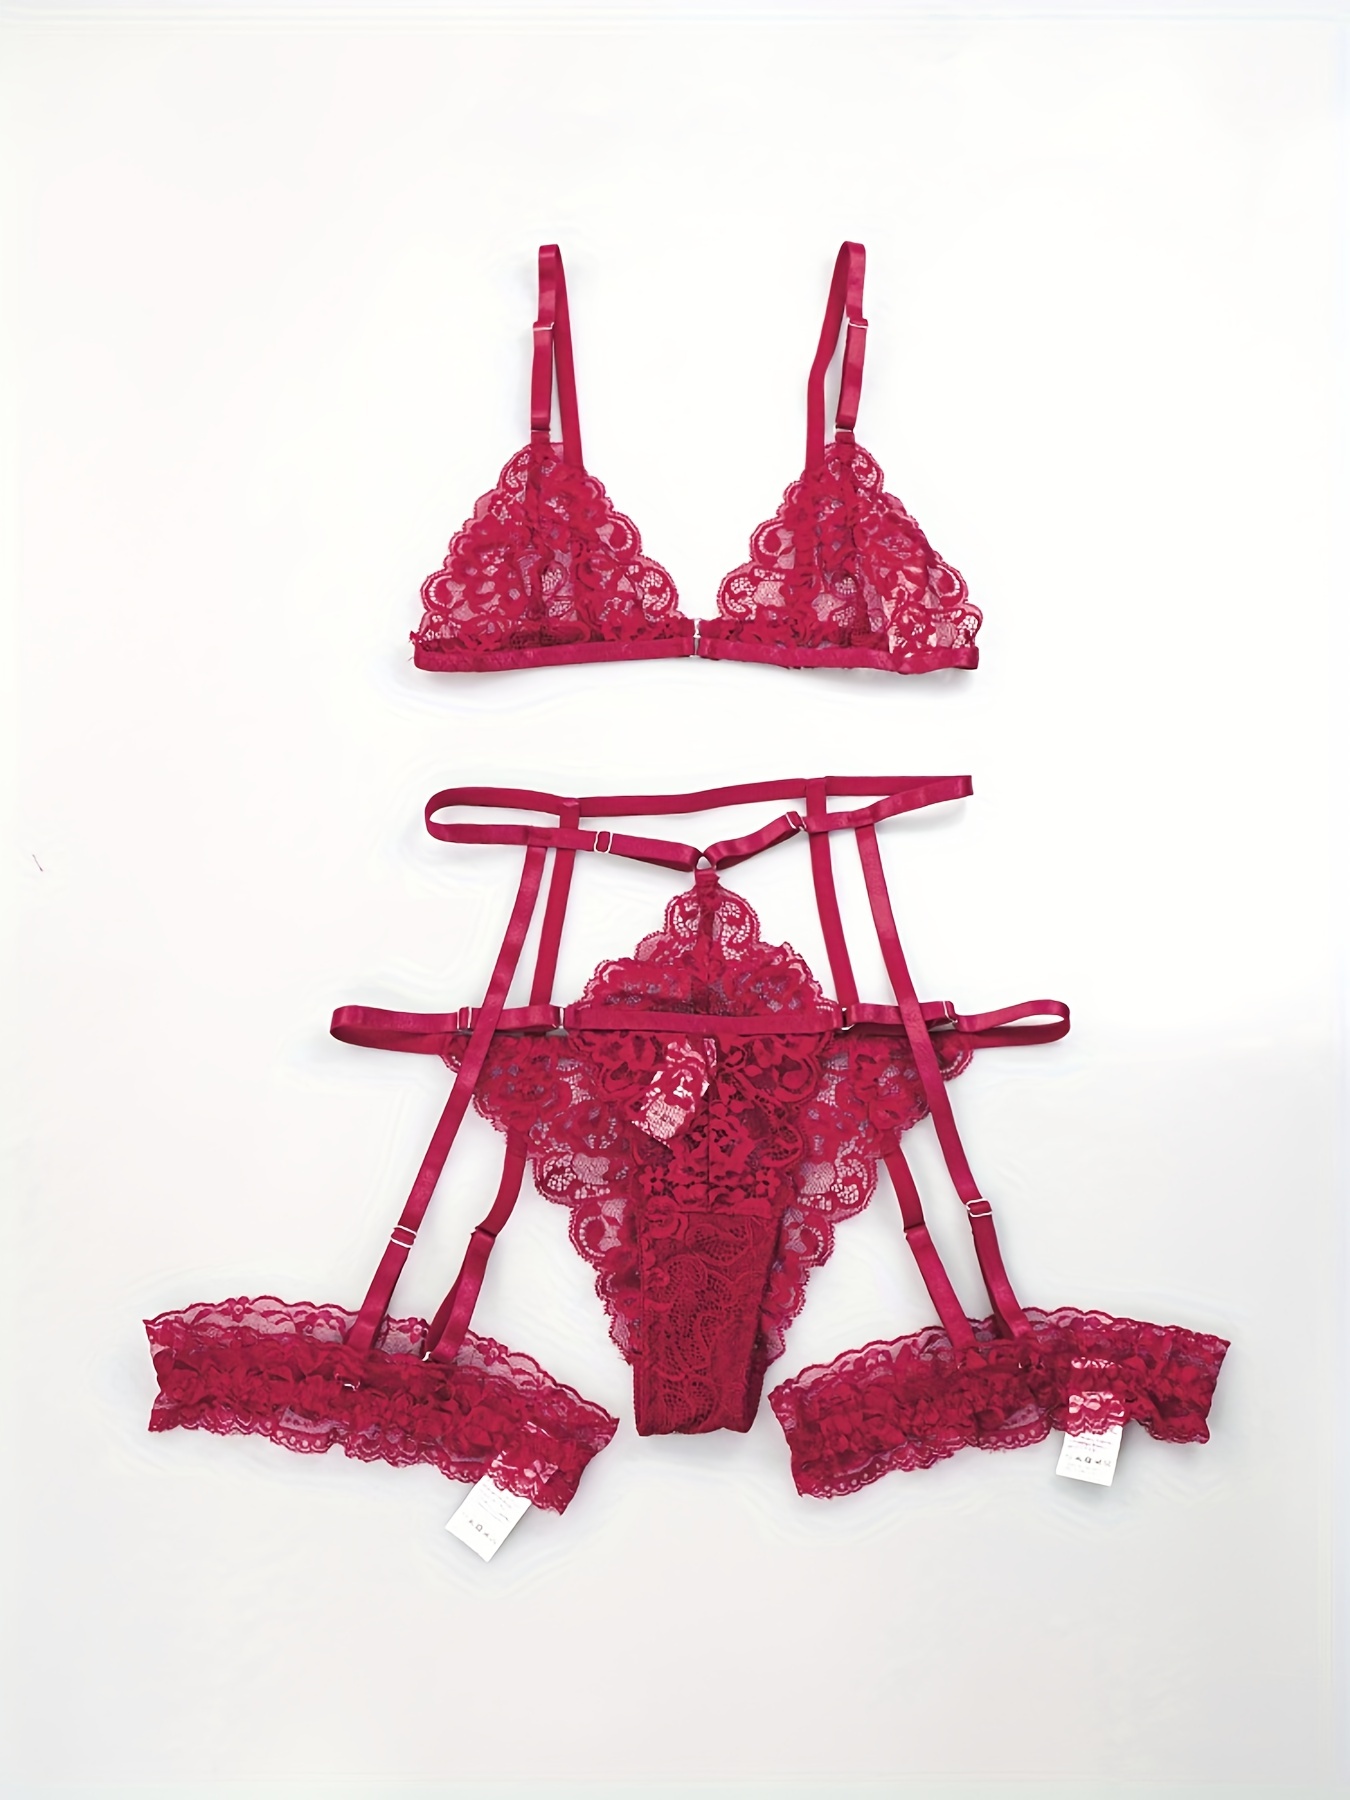 Women Lingerie Set, Panty Lace Bra and Panty Set for Wedding